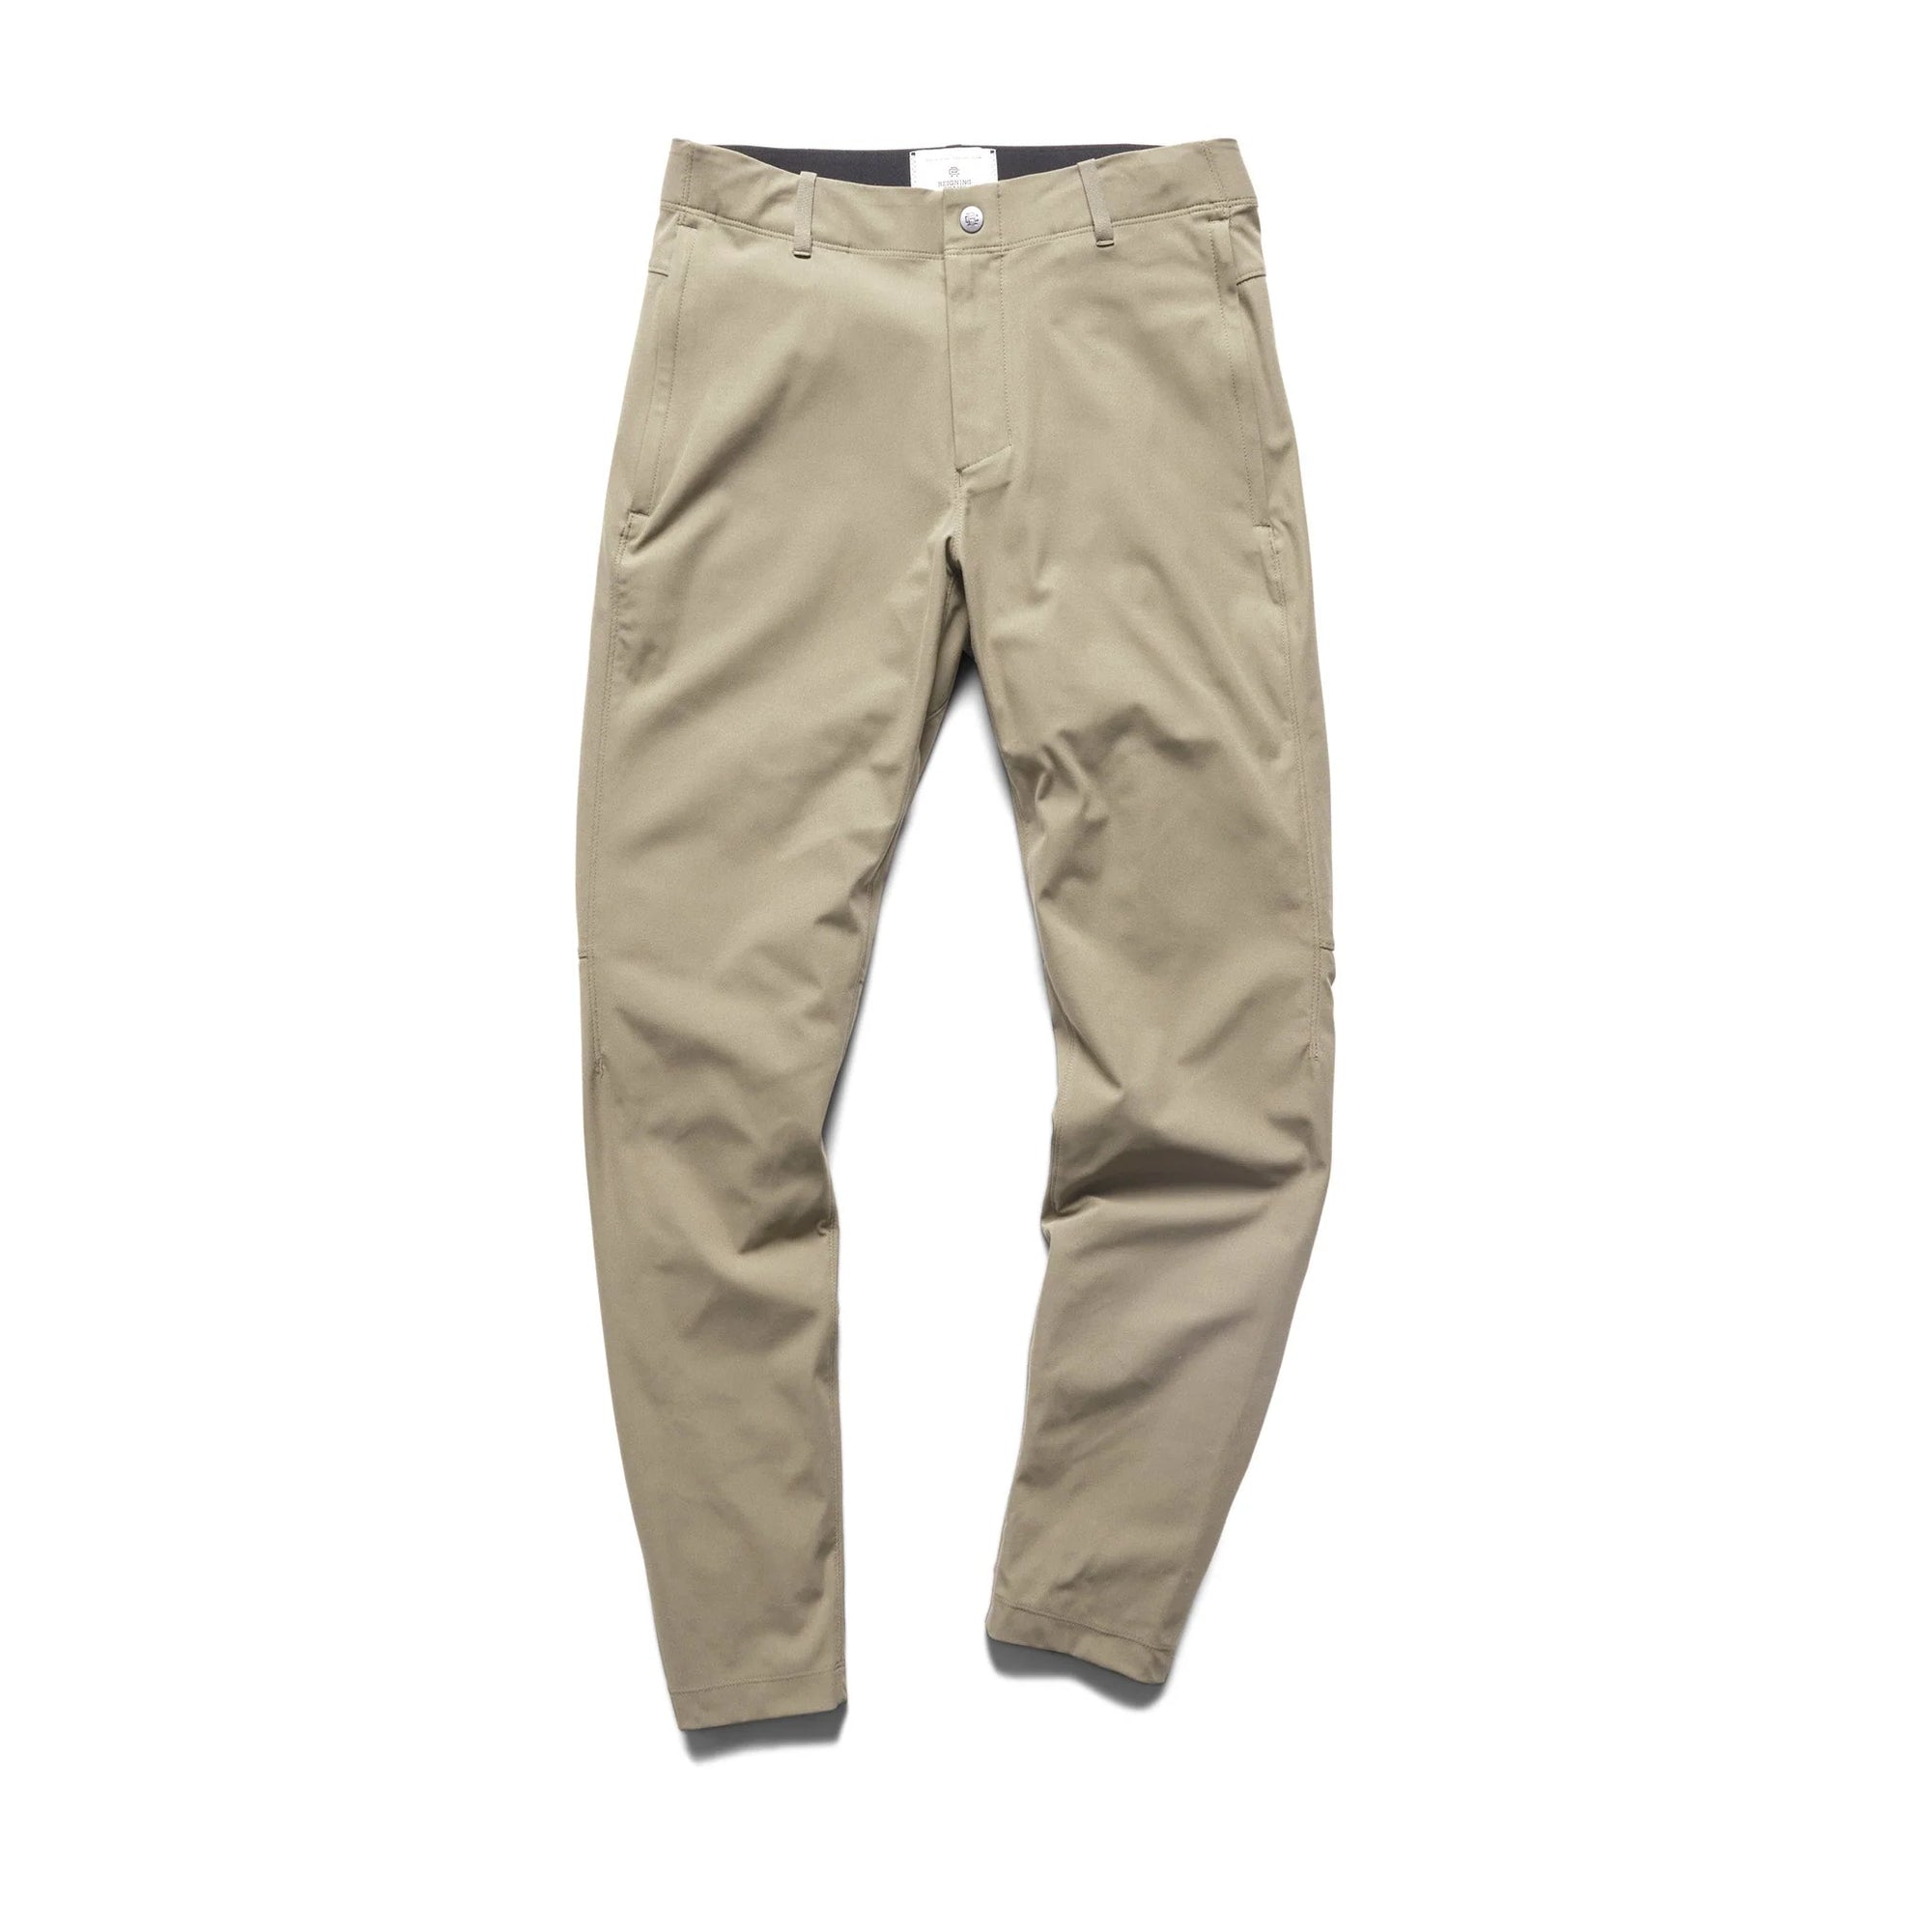 Reigning Champ Coach's Pant in Sand